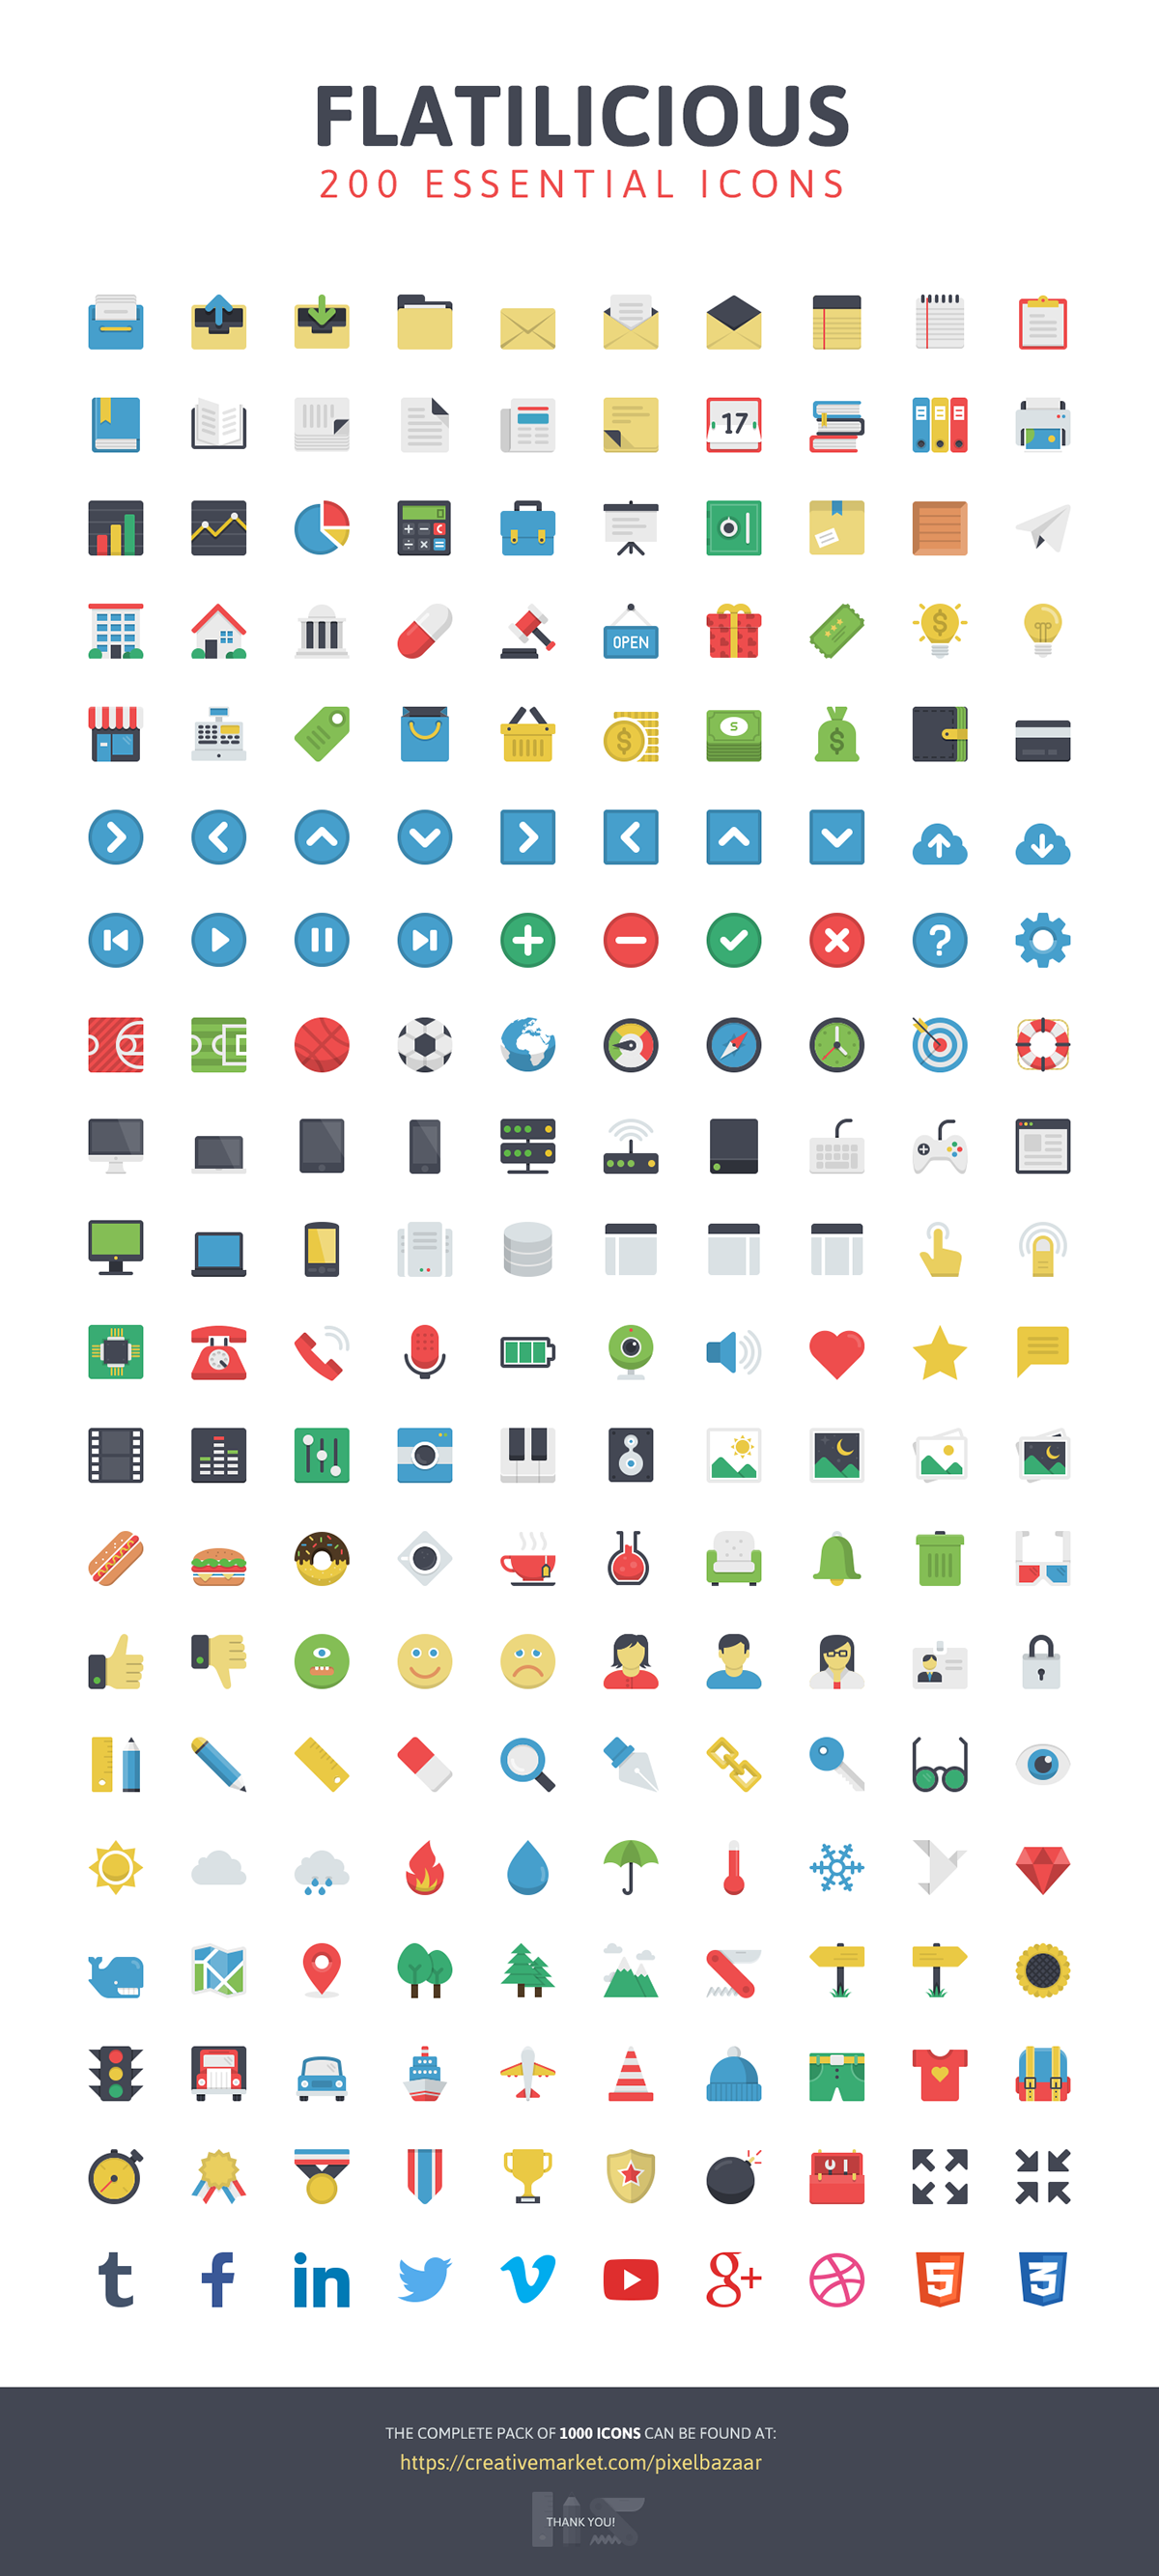 flat icons Business Icons colorful finance flat icons ecommerce flat icons design documents flat office flat icons security camping nature flat technology flat multimedia flat icons sports